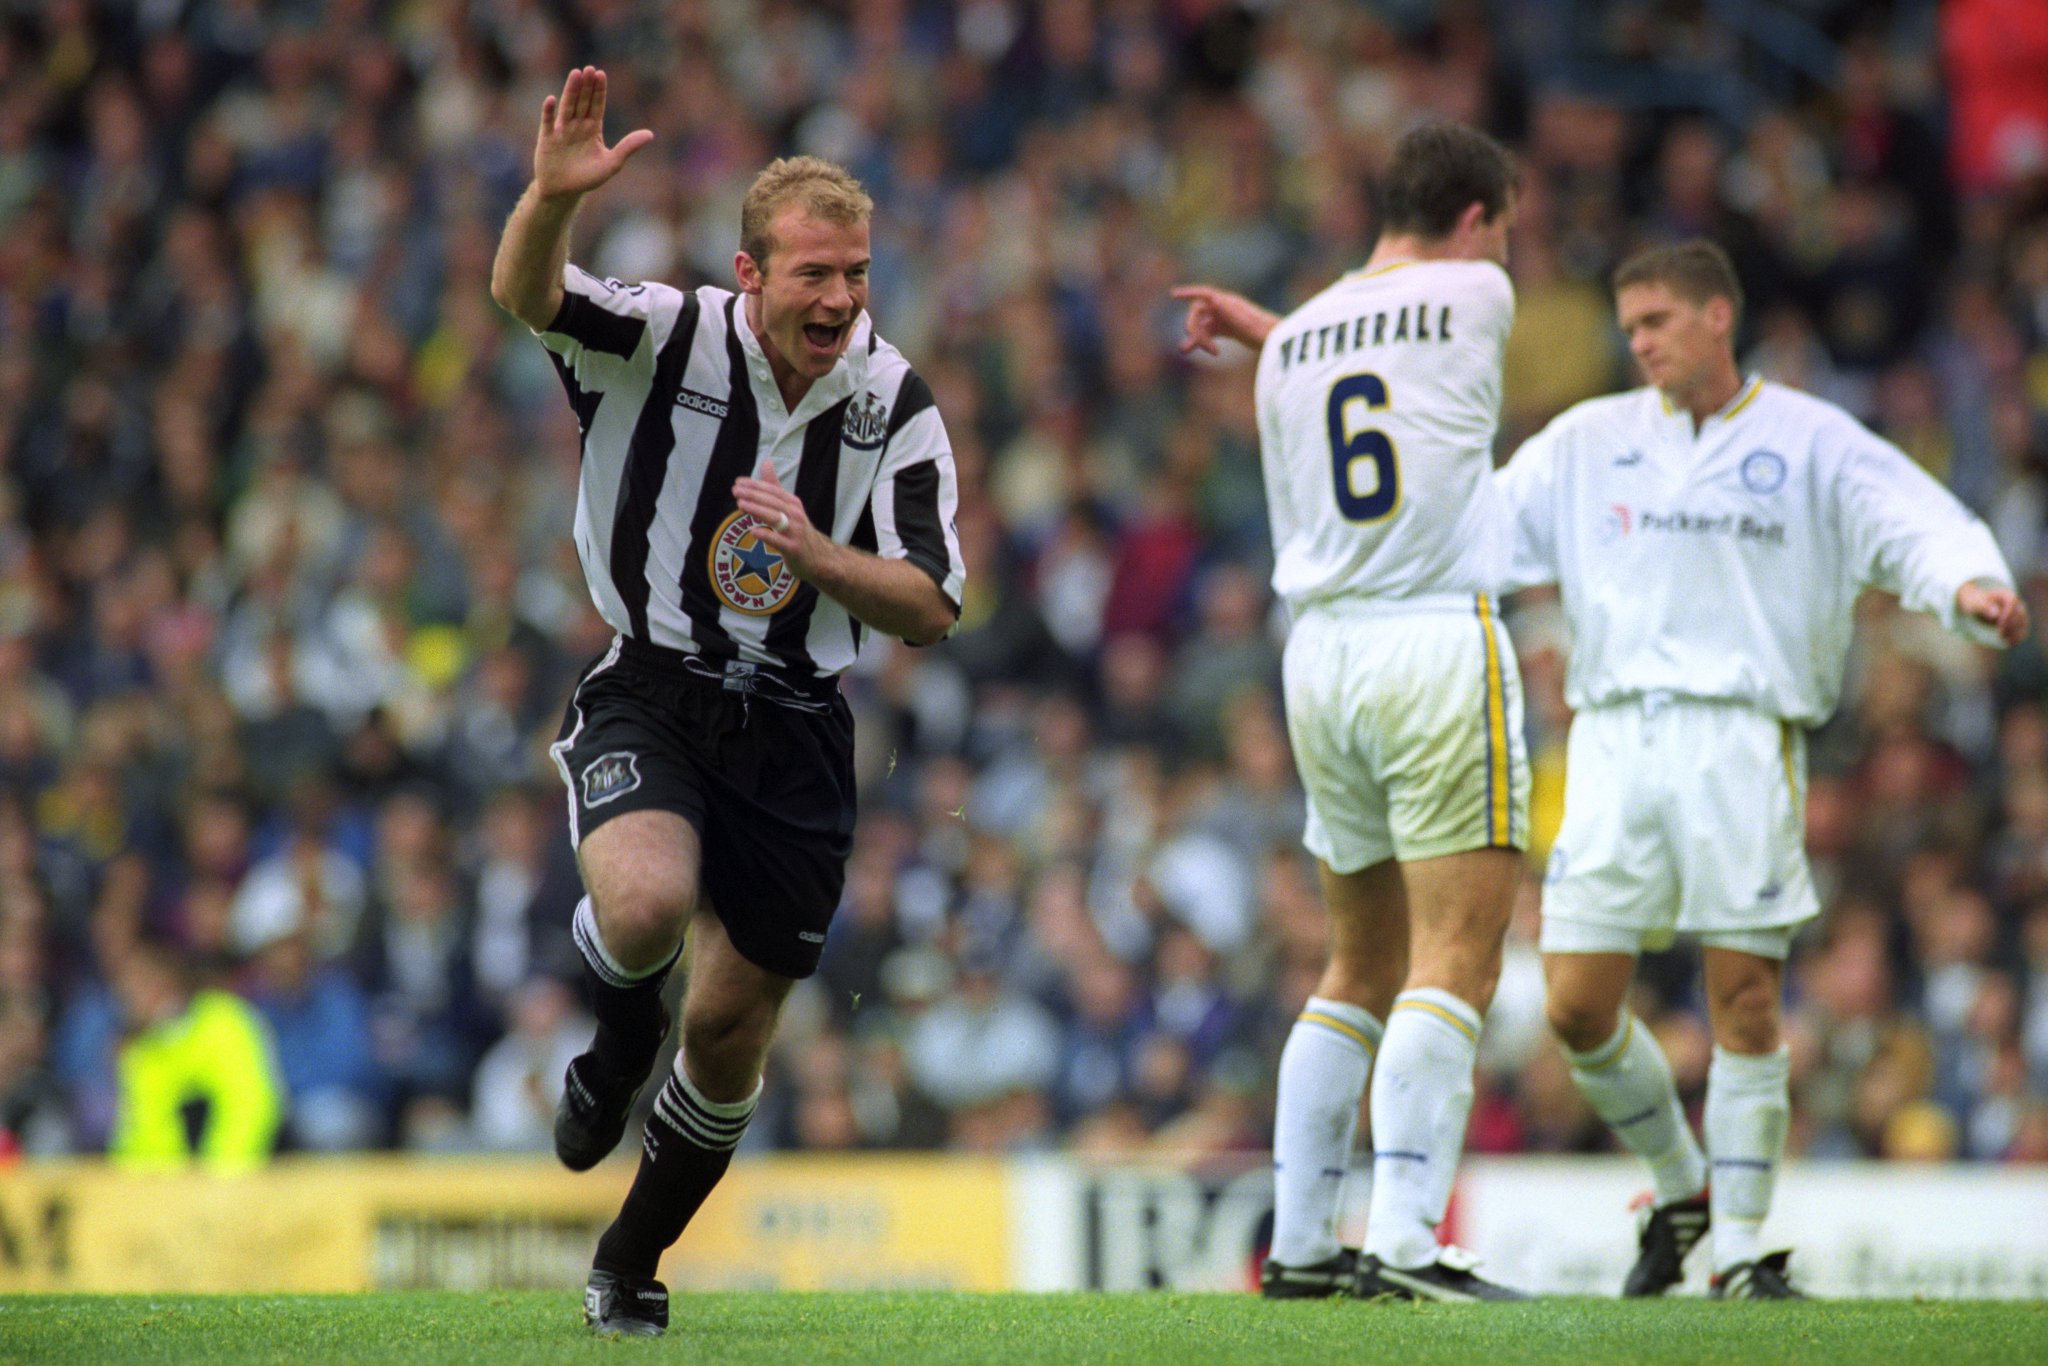 Happy birthday to the all-time Premier League top-scorer and legend, Alan Shearer 